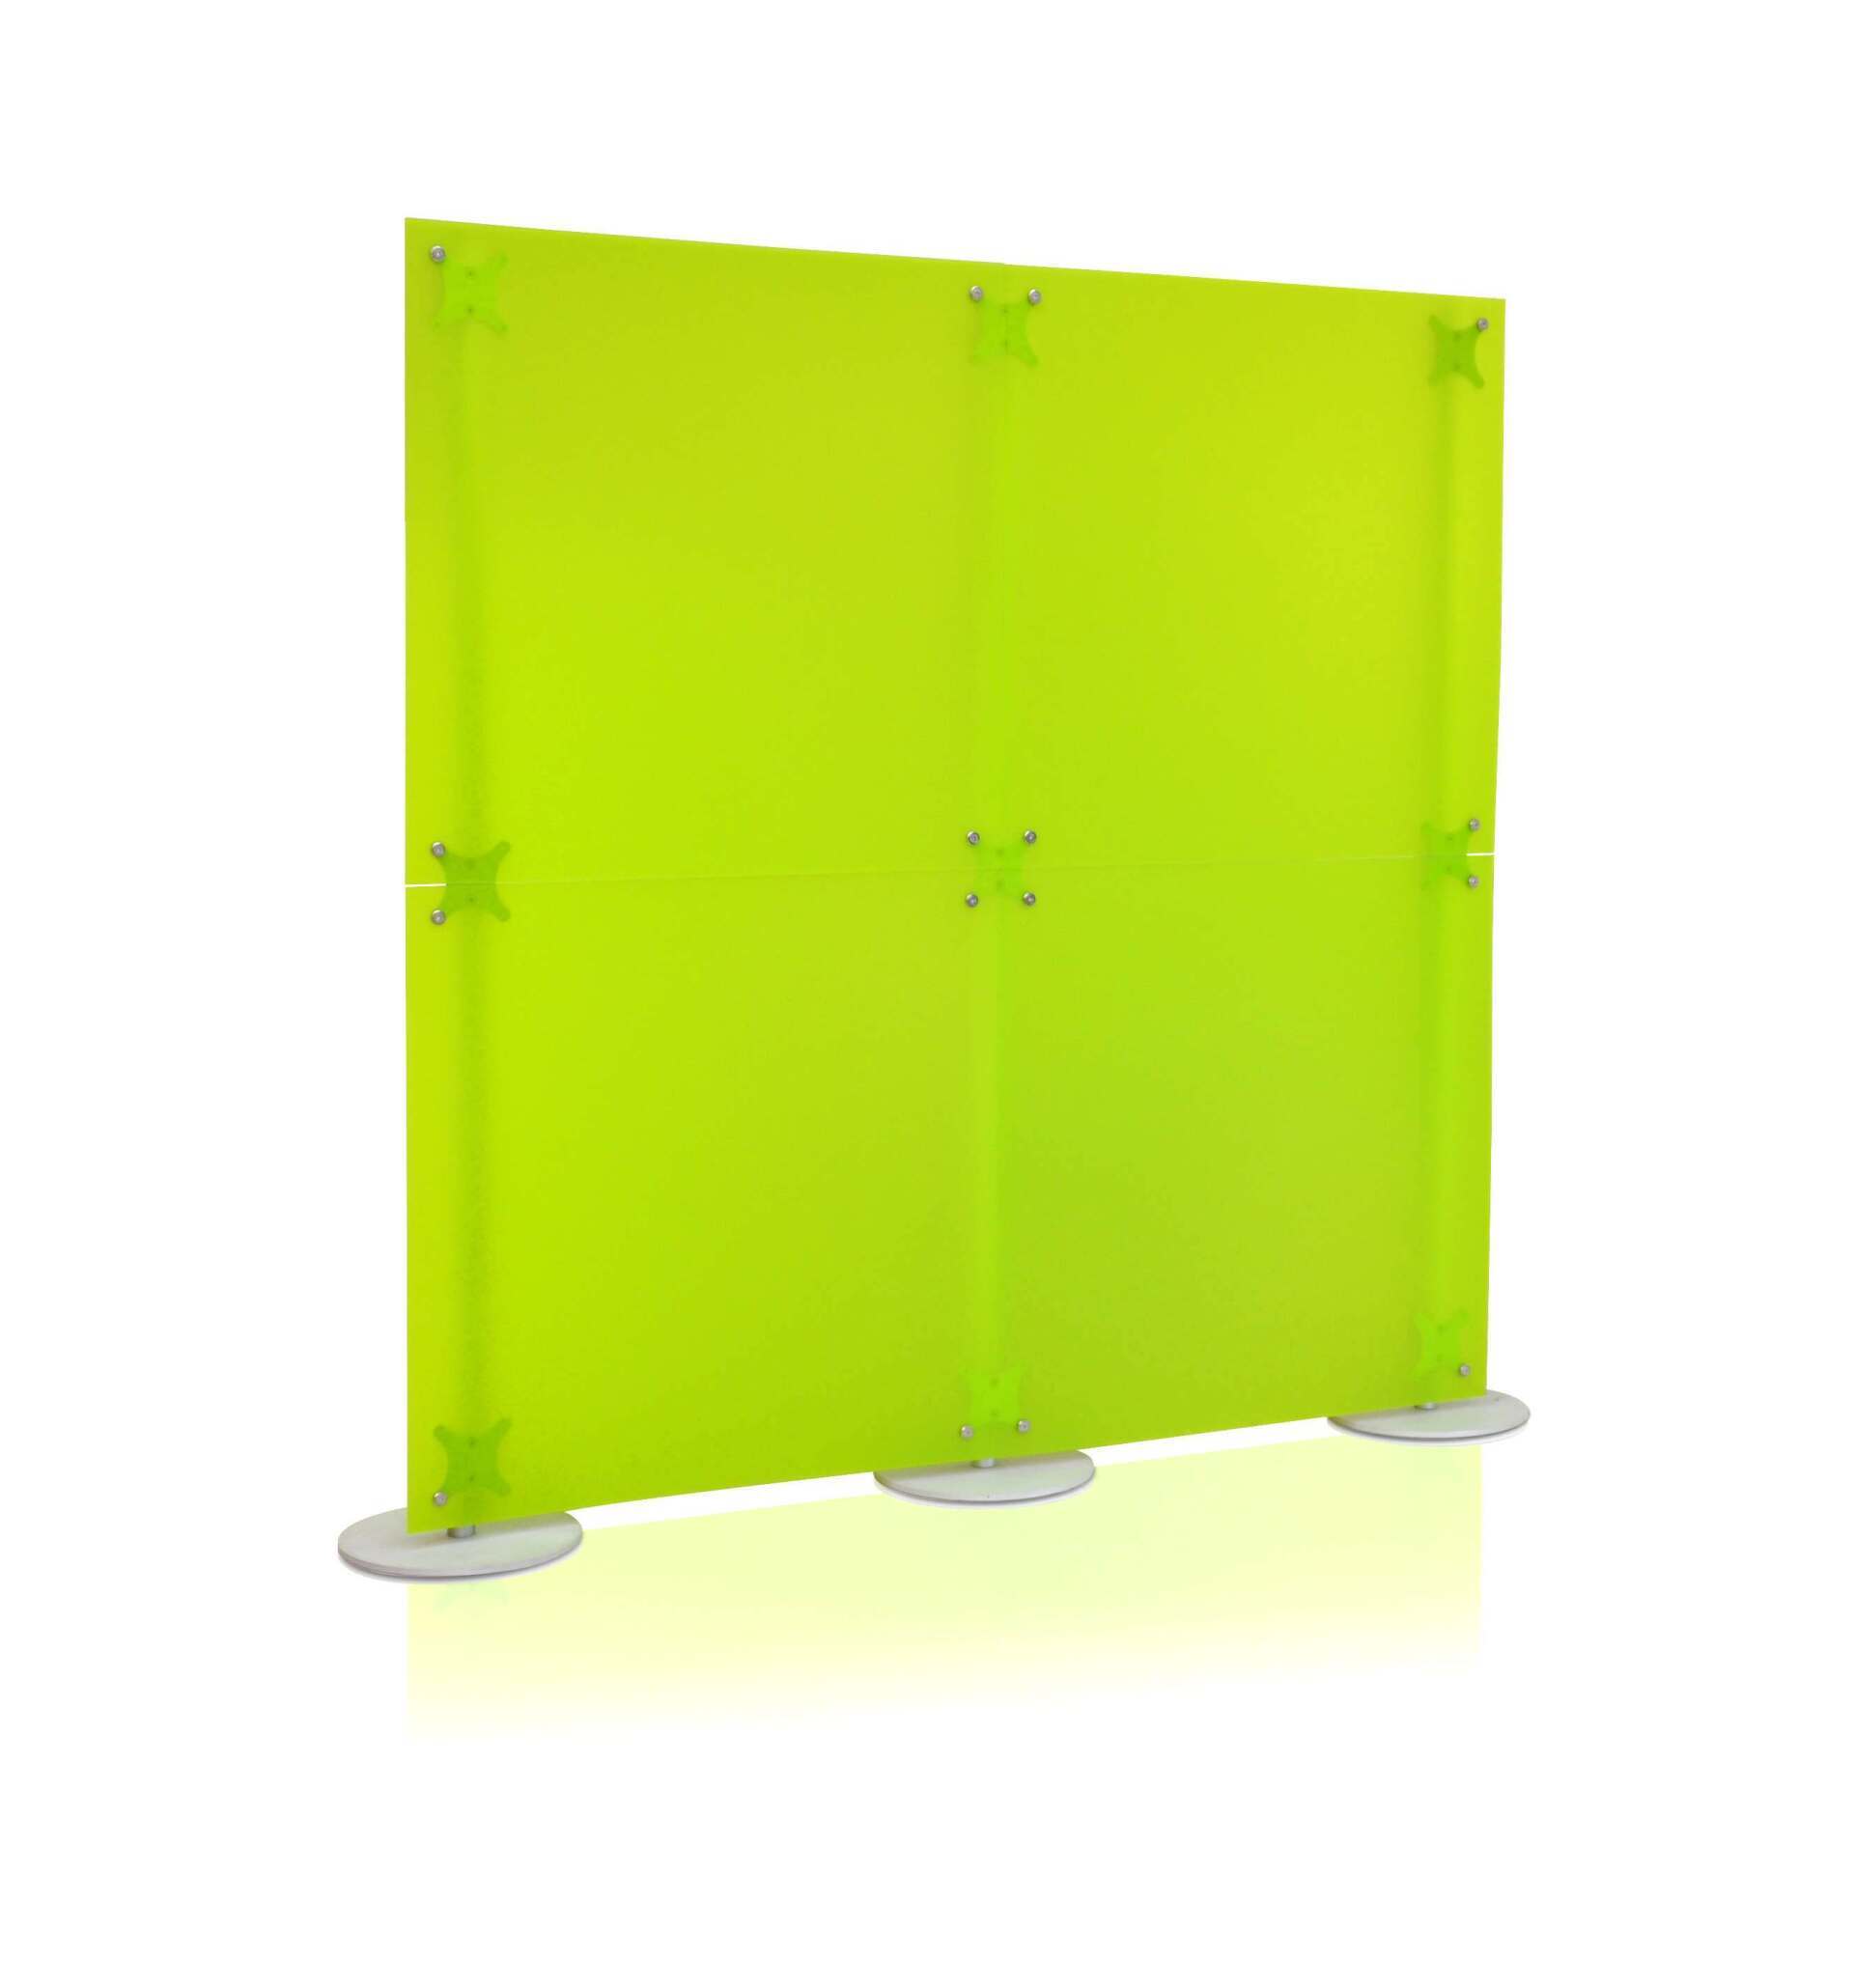 Movable partition walls